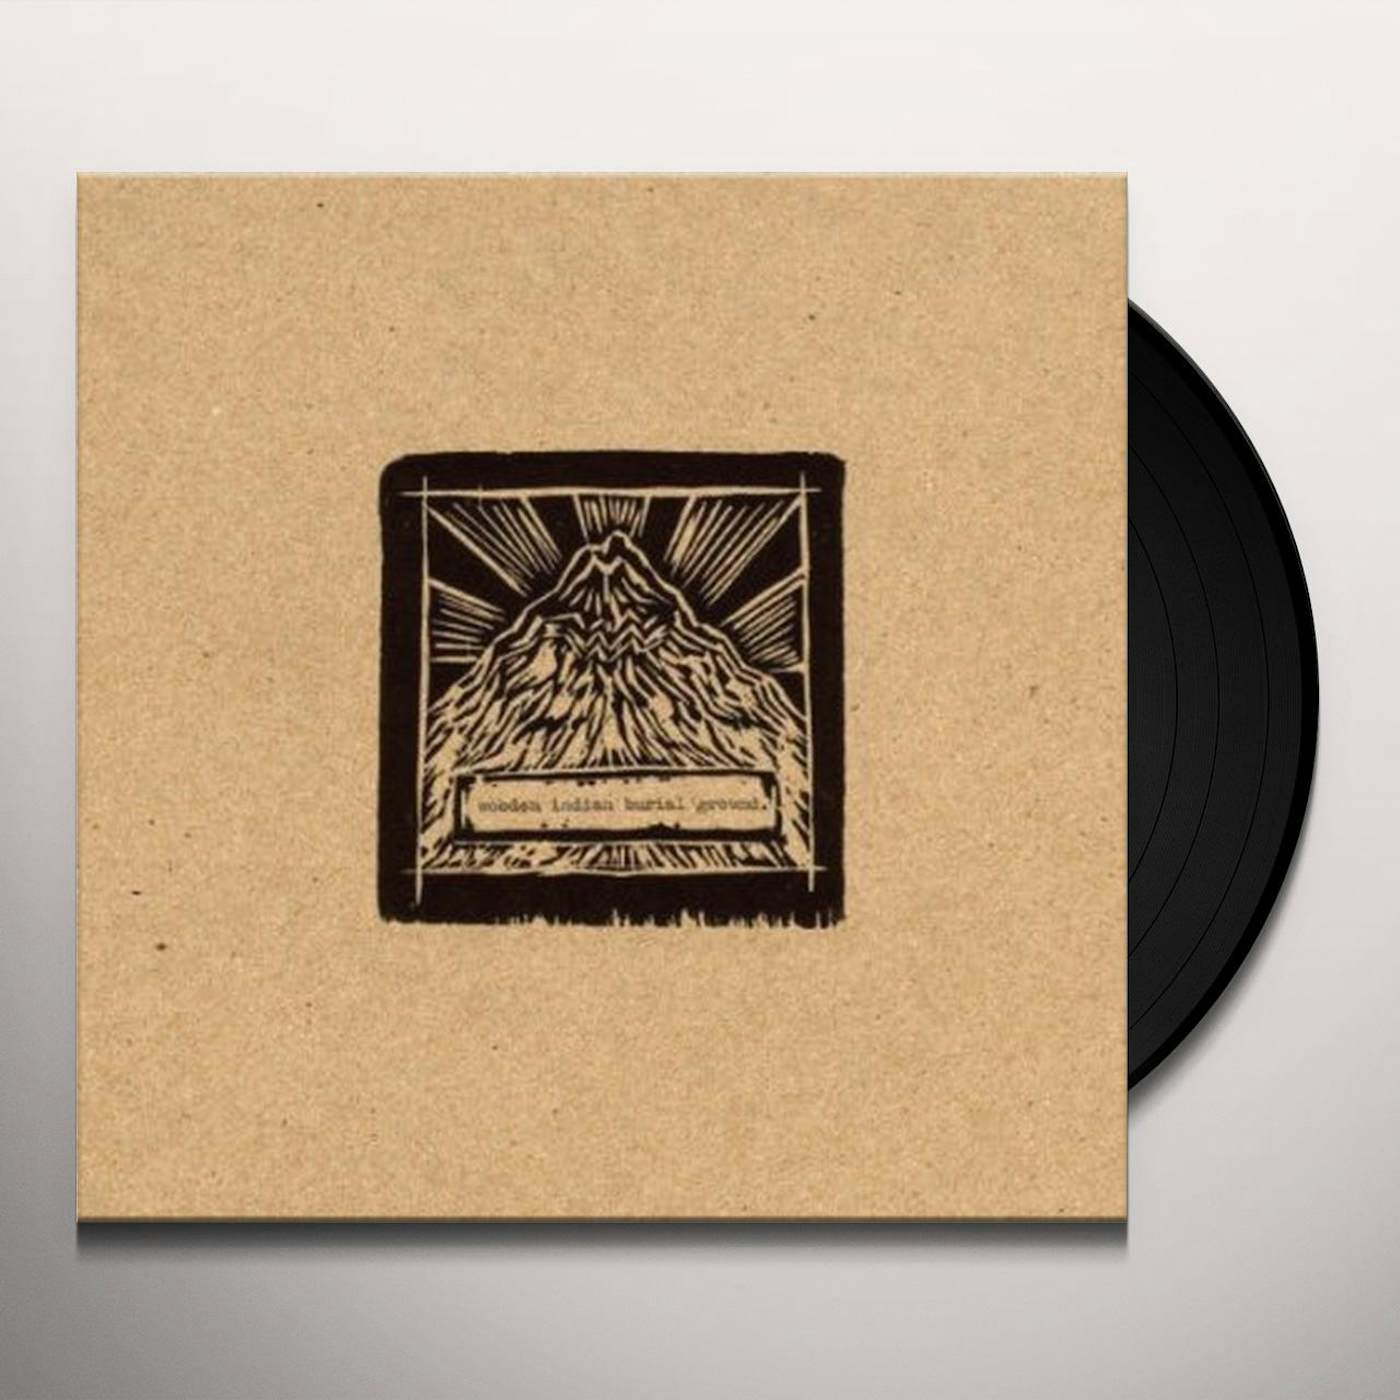 Wooden Indian Burial Ground HOLY MOUNTAIN BETWEEN SUNBEANS & THE COSMIC ASCENT Vinyl Record